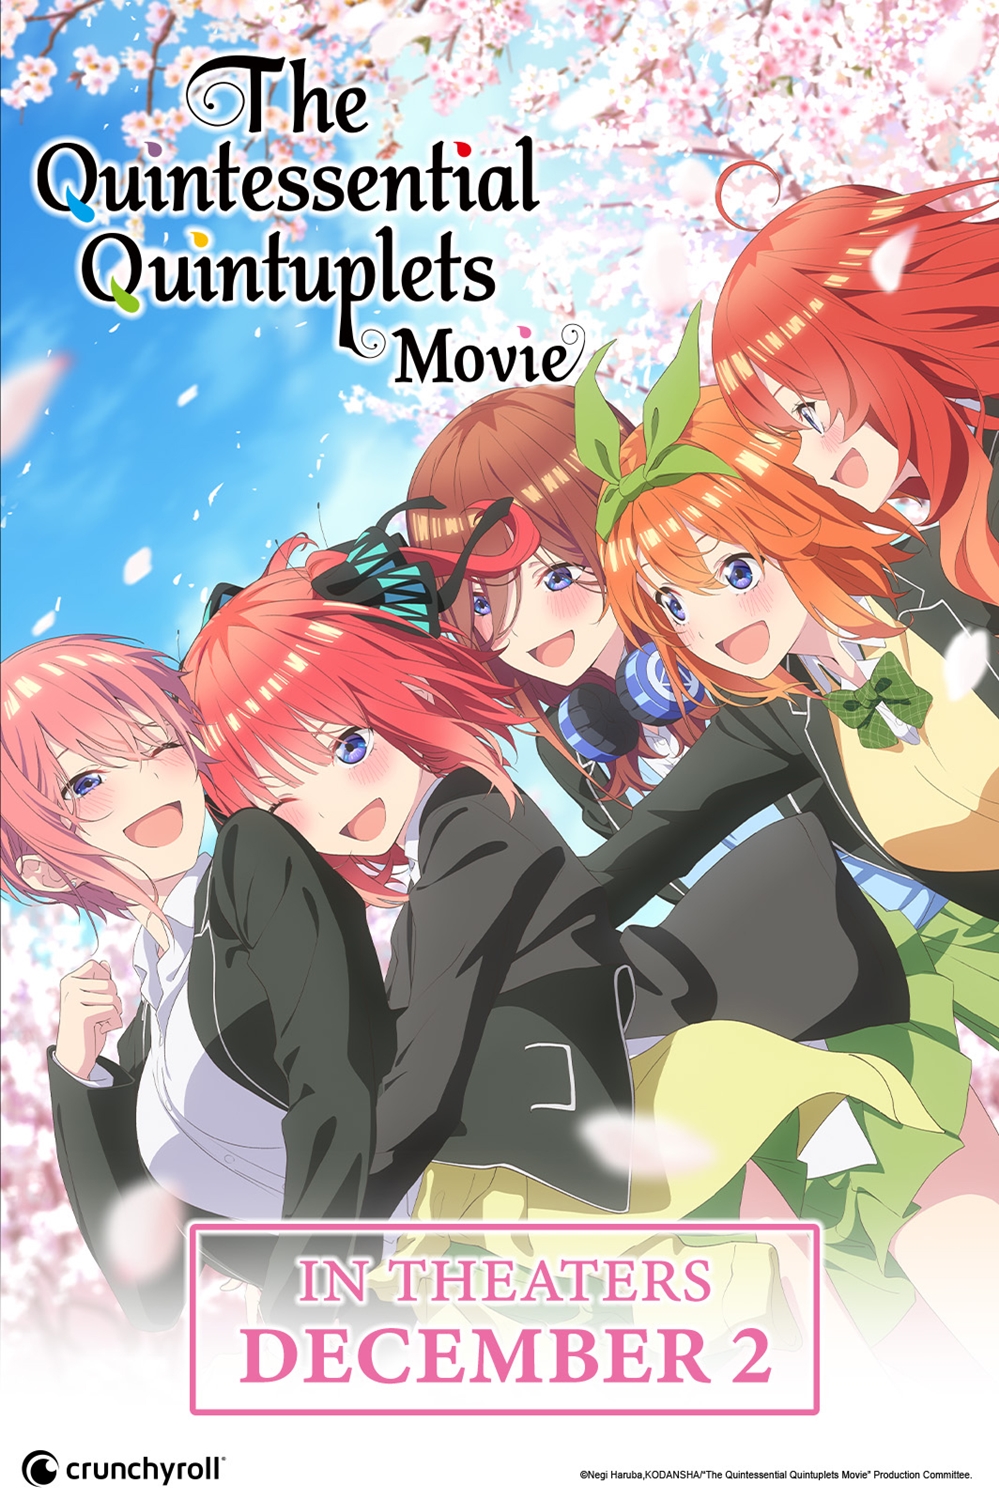 Quintessential Quintuplets Movie theater Poster. Got it from my regal movie  theater since I work there and was practically begged for it as I'm a big  quint fan surprisingly they only had